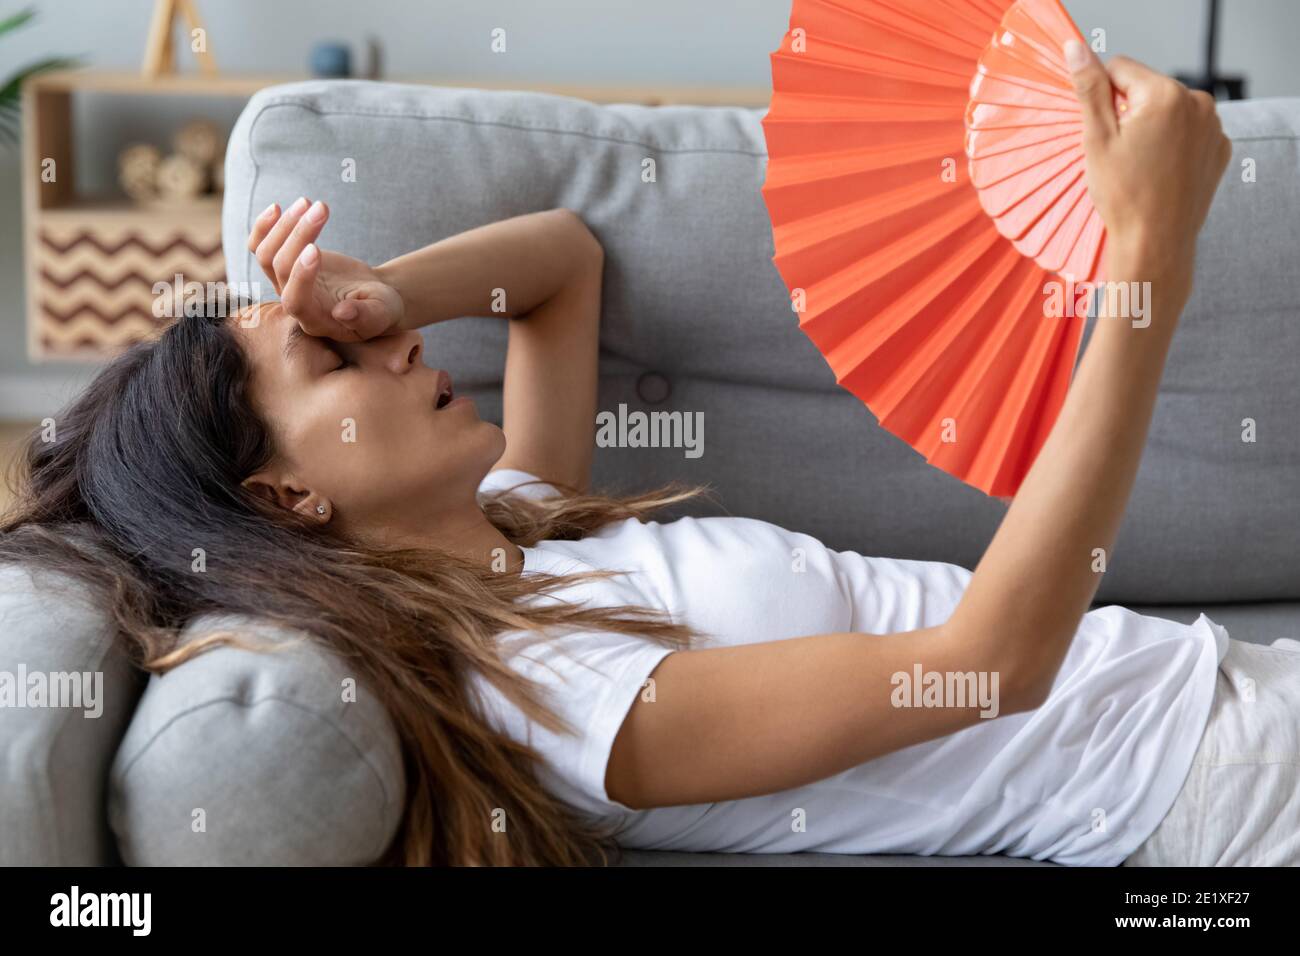 Close up overheated woman waving paper fan, lying on couch Stock Photo